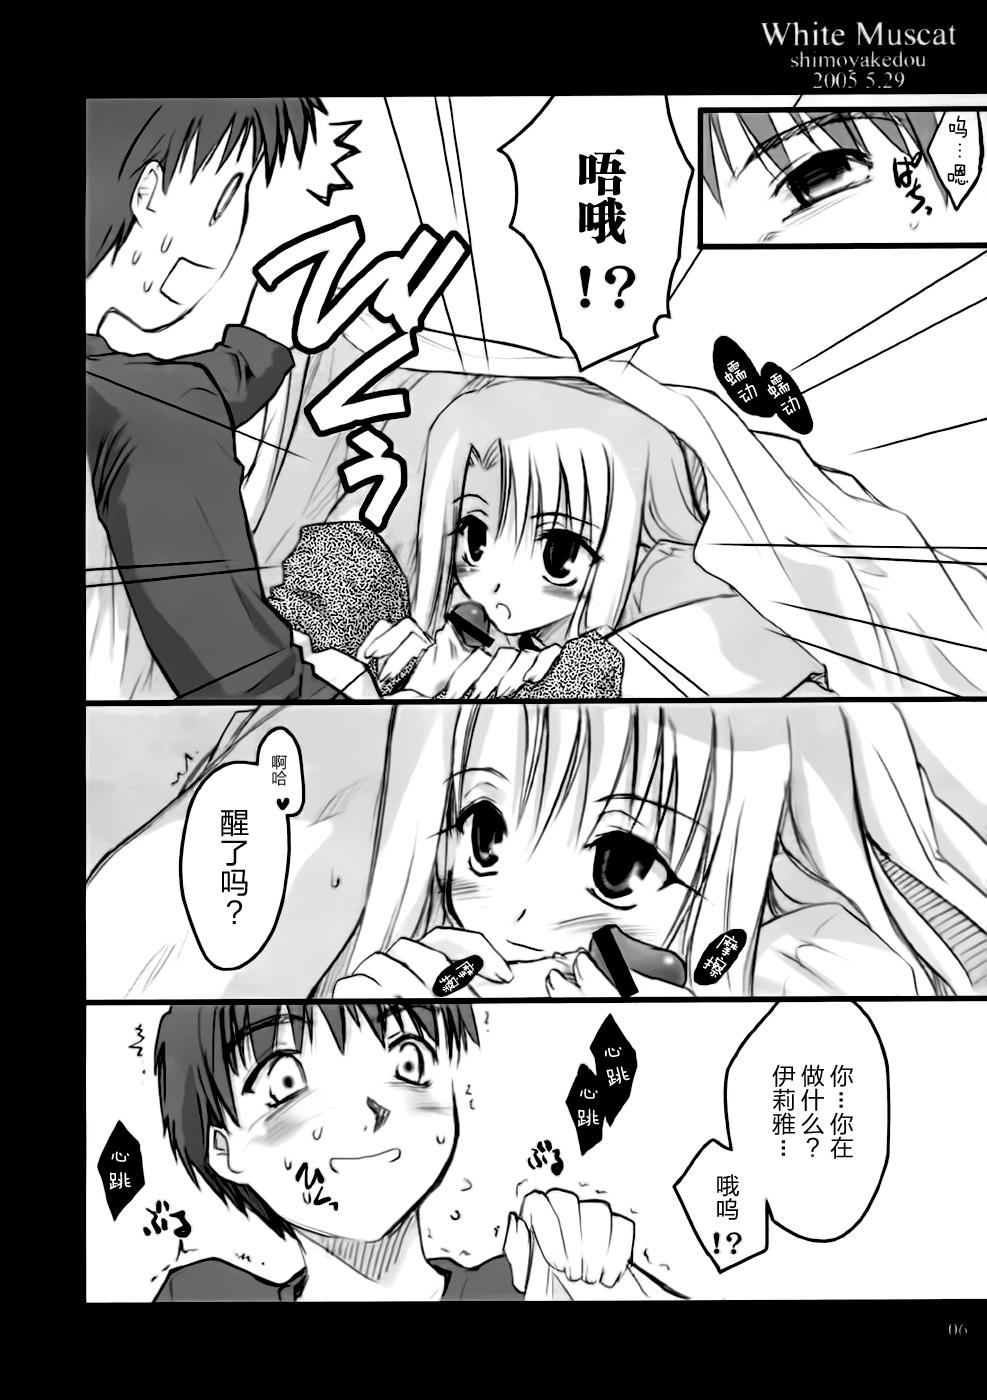 Sex Toy White Muscat - Fate stay night This - Page 6